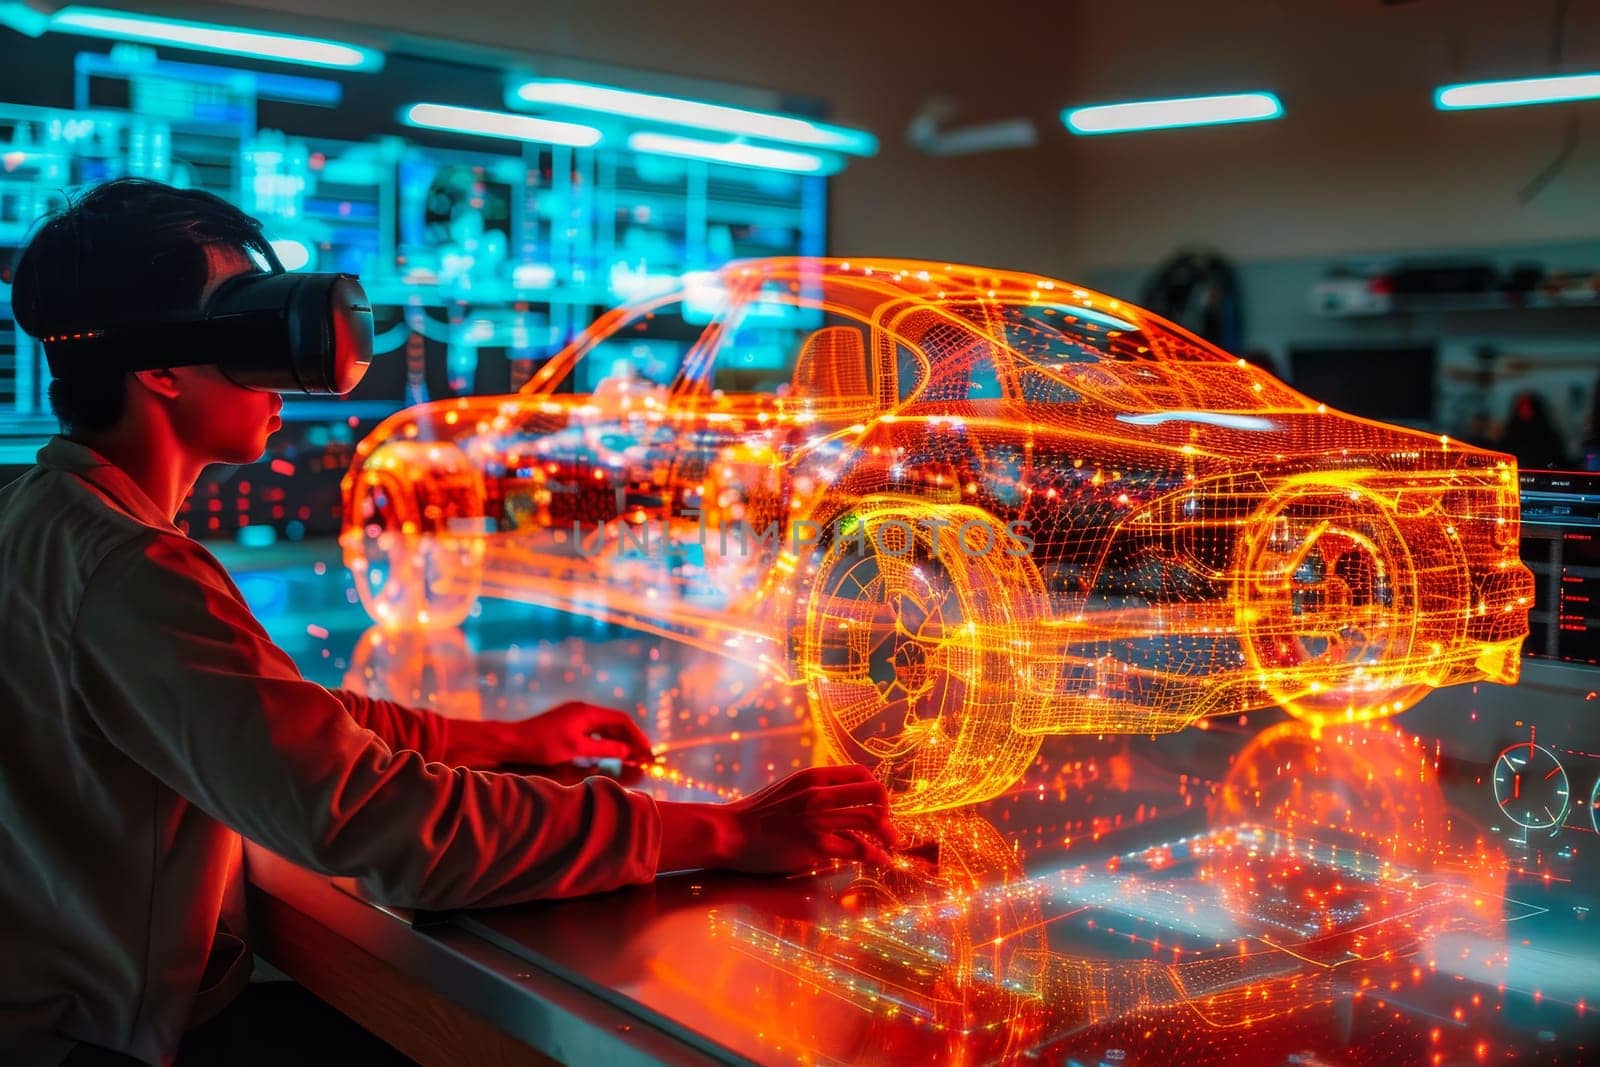 A person is looking at a car with a VR headset on. The car is a futuristic design with bright orange accents. The man is examining the car's engine, possibly making adjustments or repairs